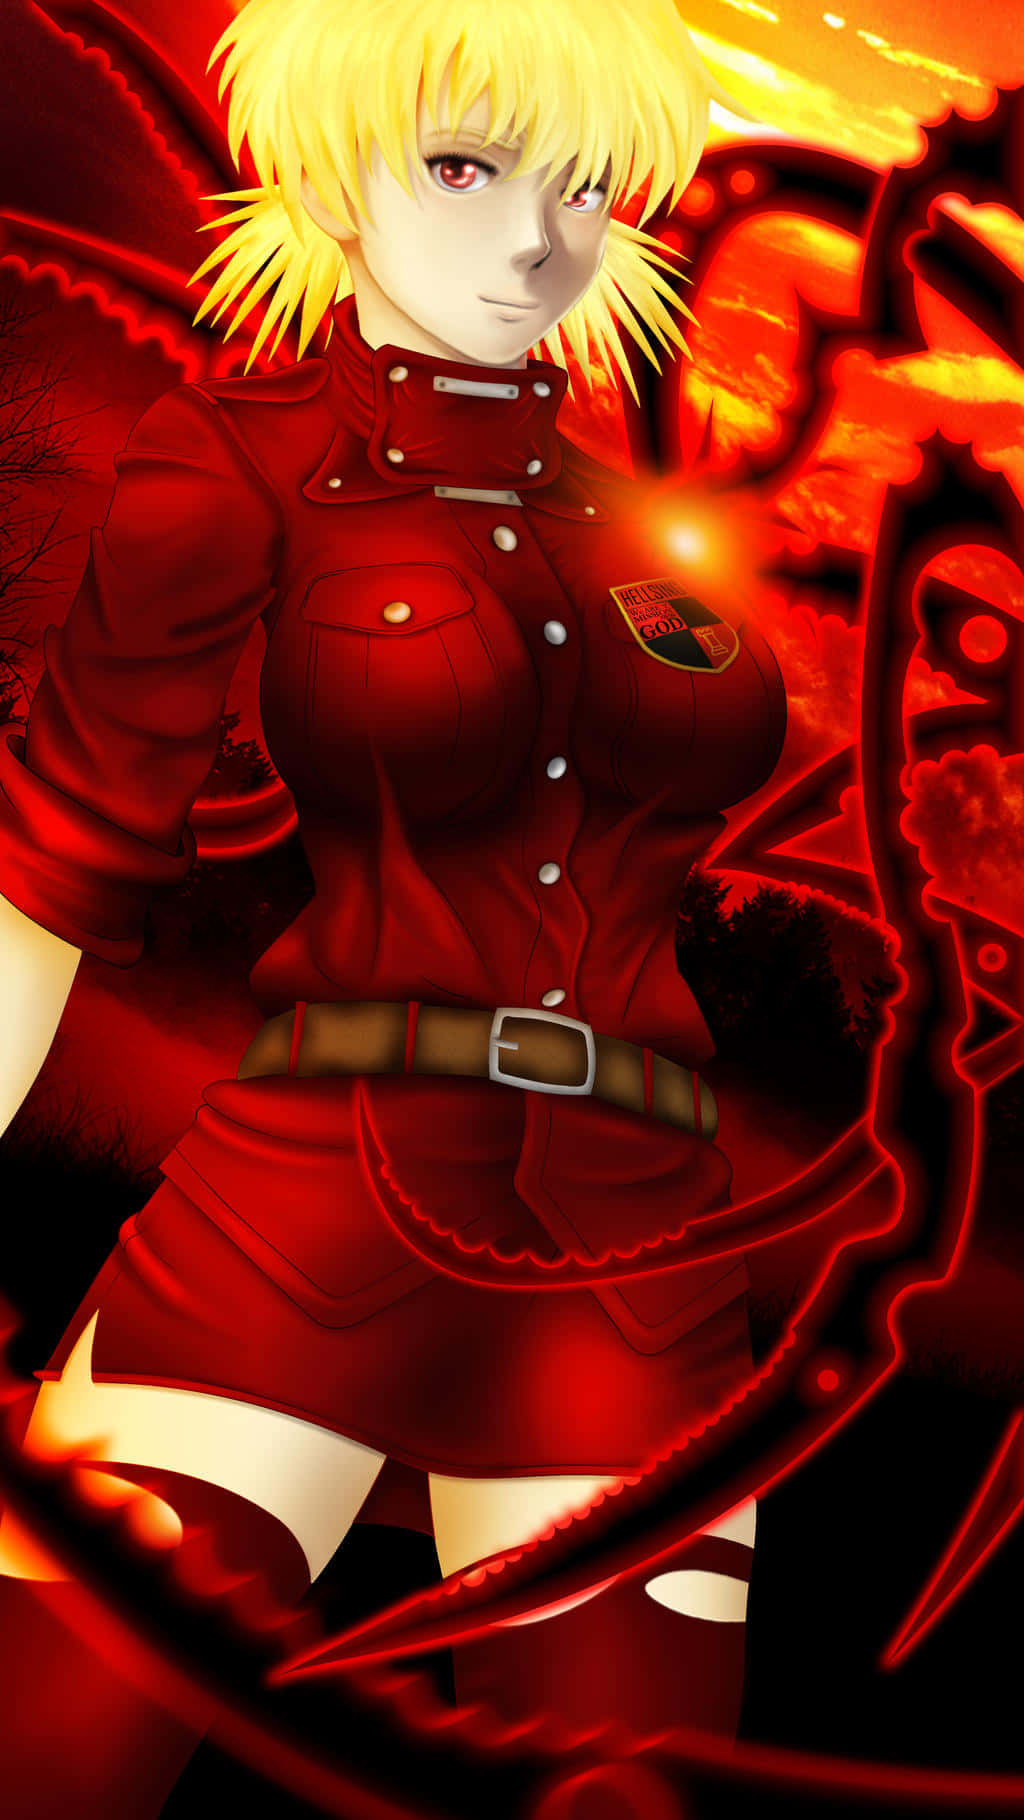 Seras Victoria - The Unstoppable Hellsing Force Wallpaper